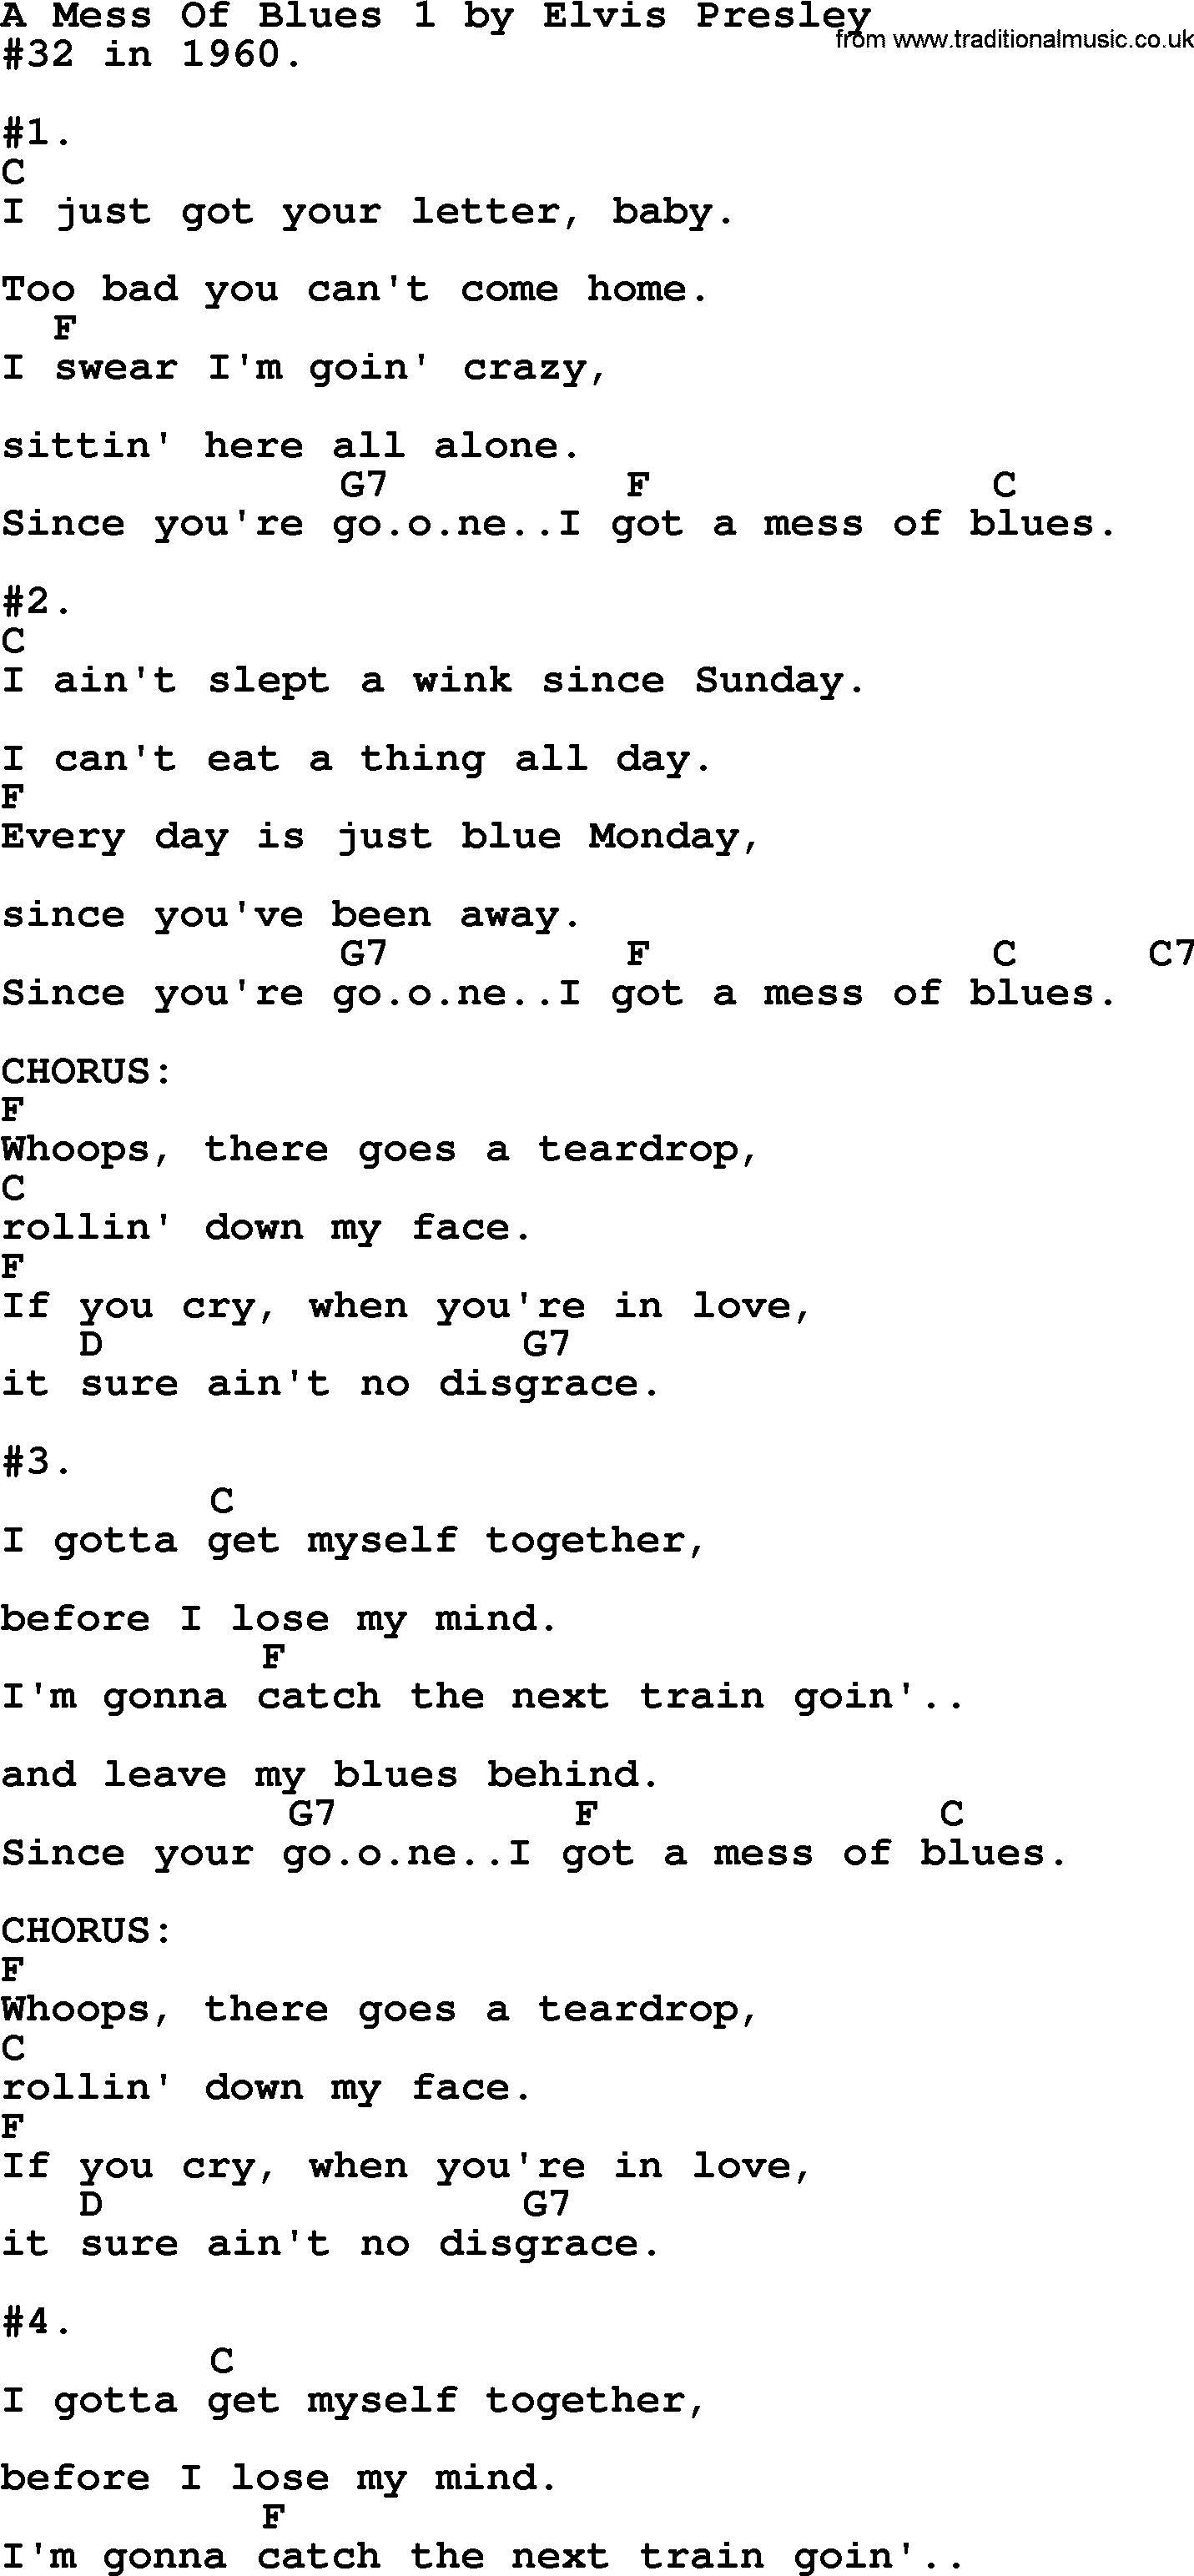 Elvis Presley song: A Mess Of Blues 1, lyrics and chords